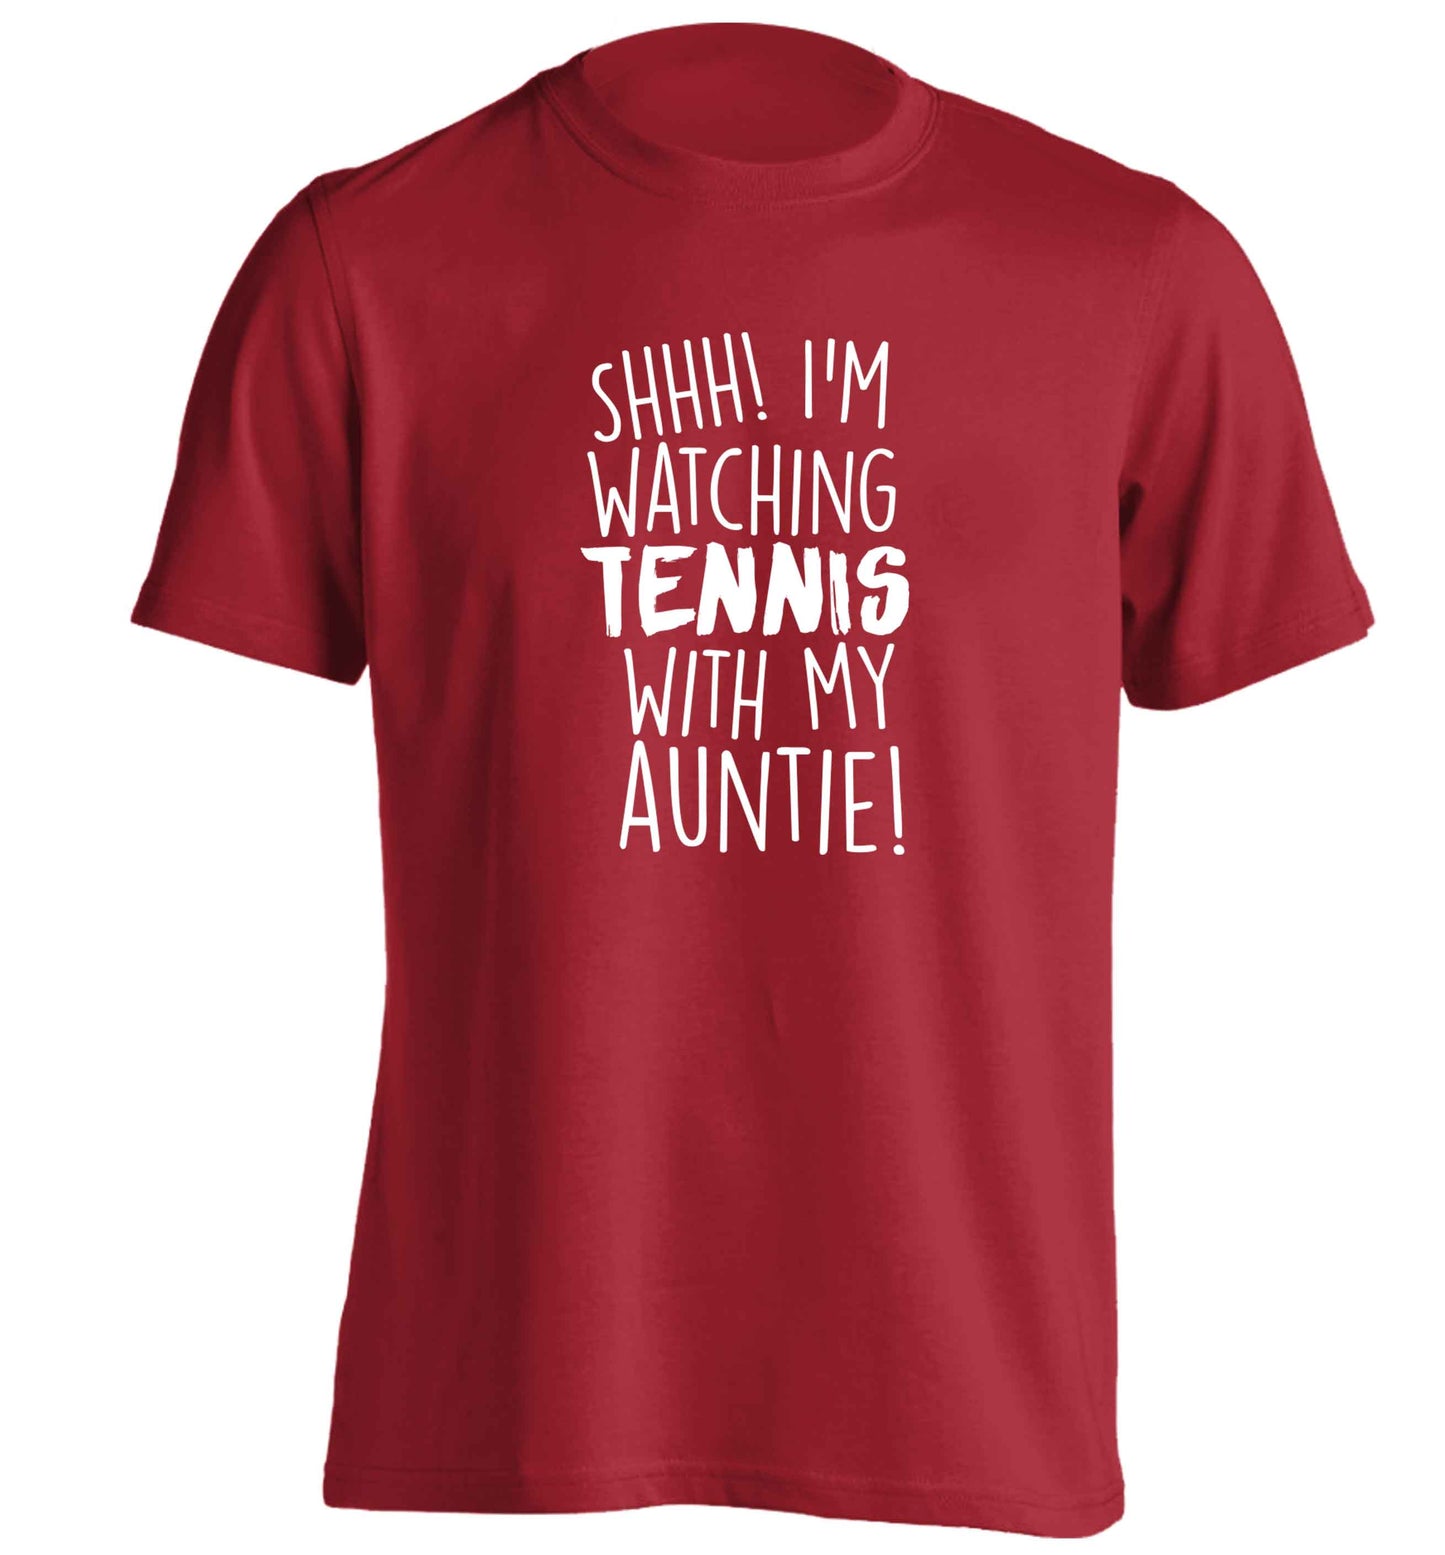 Shh! I'm watching tennis with my auntie! adults unisex red Tshirt 2XL